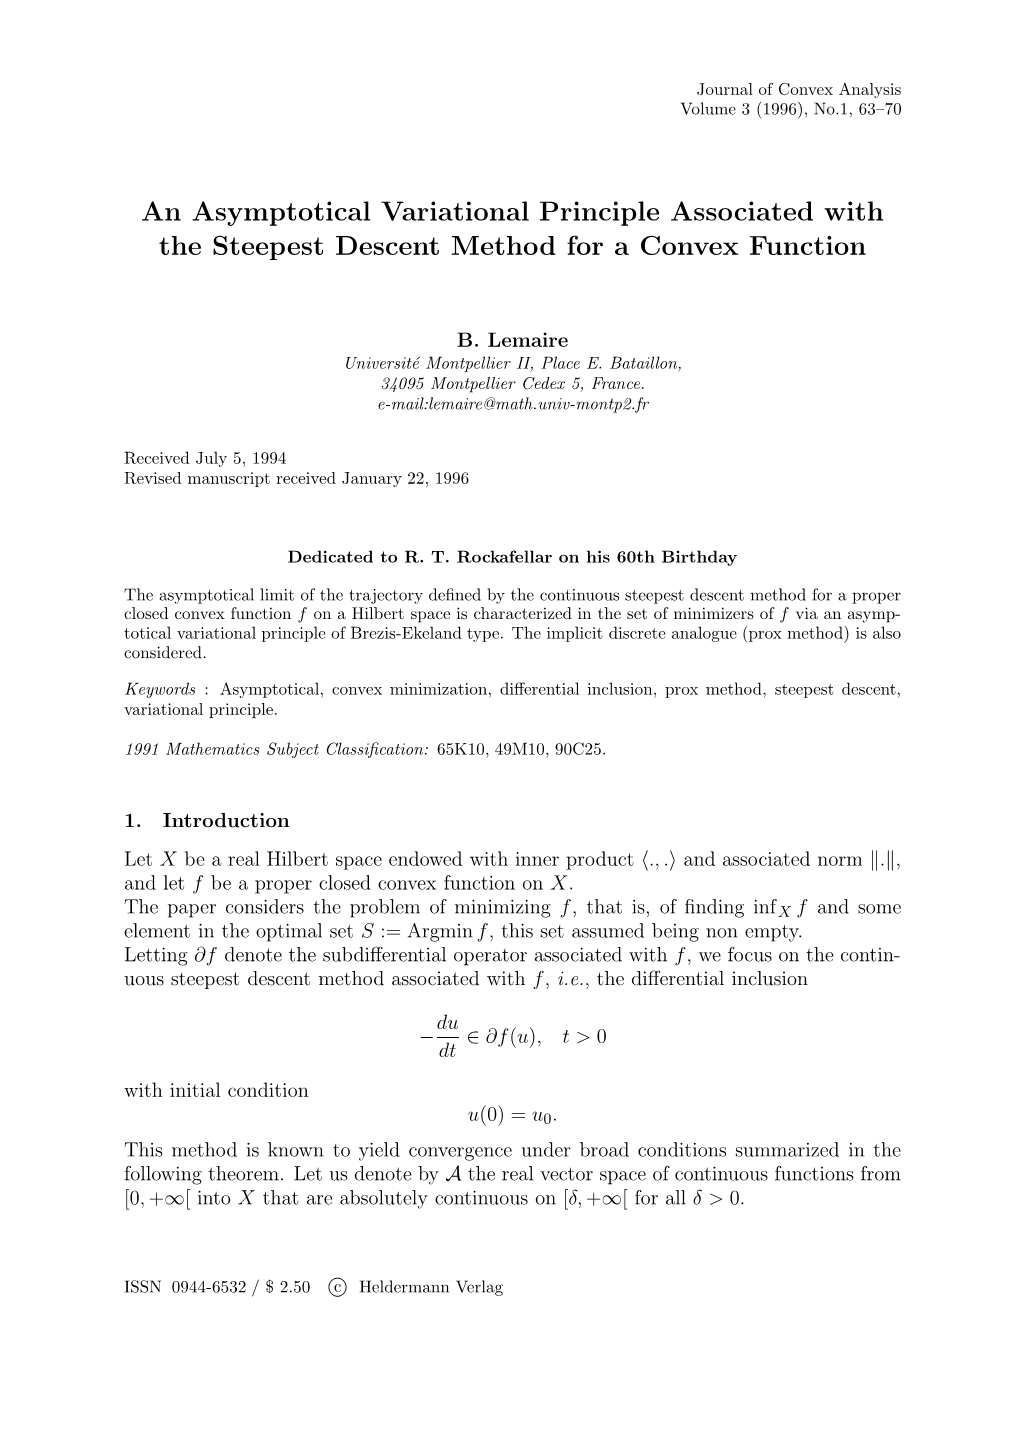 An Asymptotical Variational Principle Associated with the Steepest Descent Method for a Convex Function